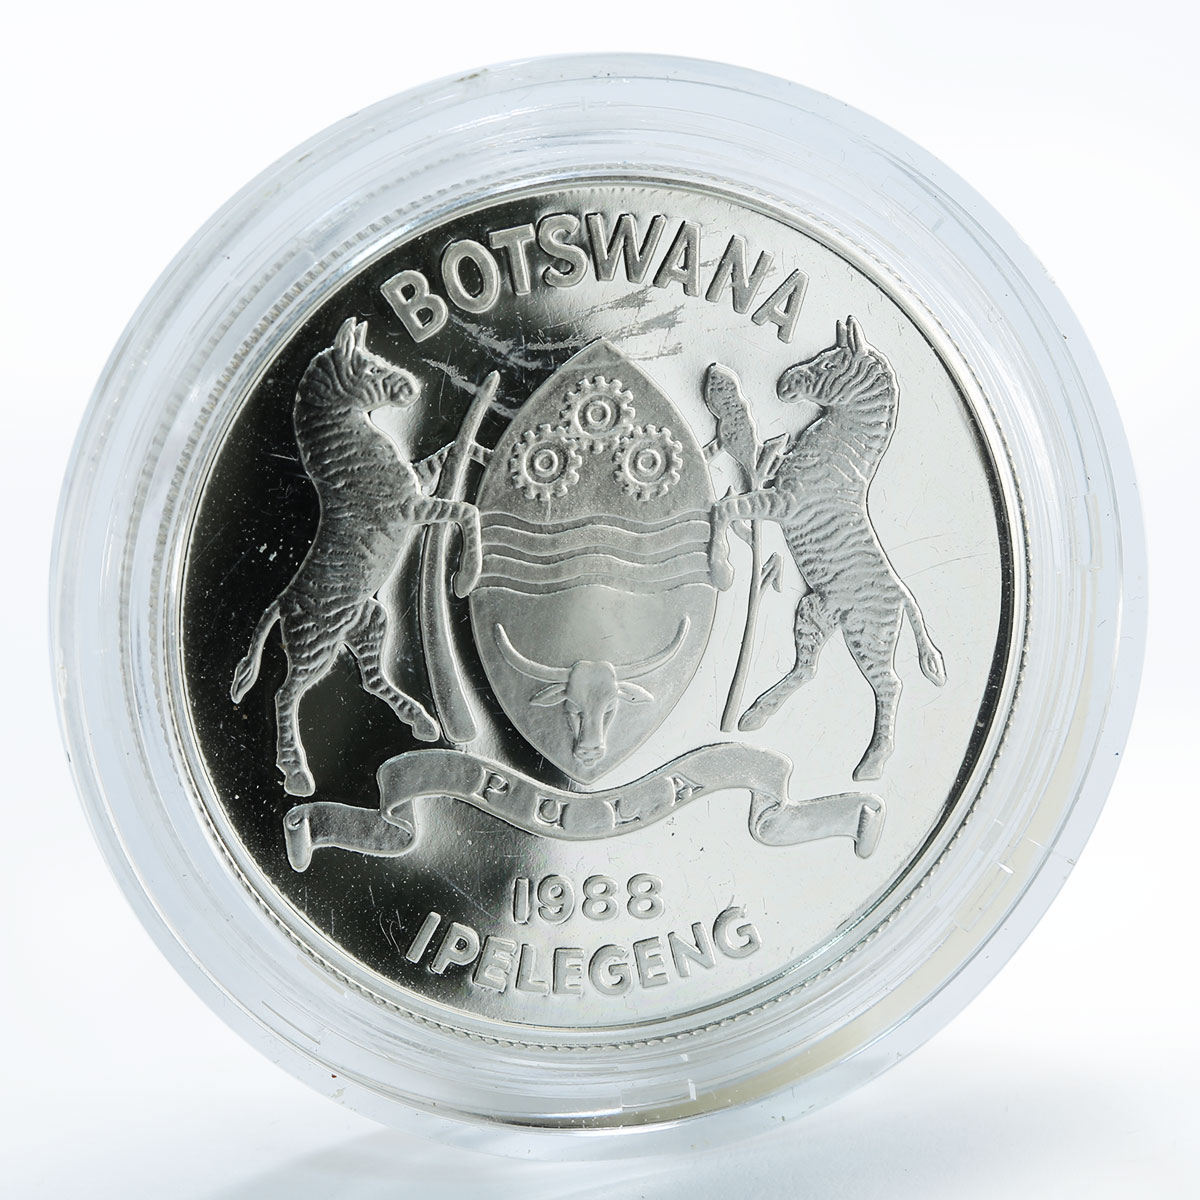 Botswana 5 pula Olympic games 1988 sport runner silver coin 1988